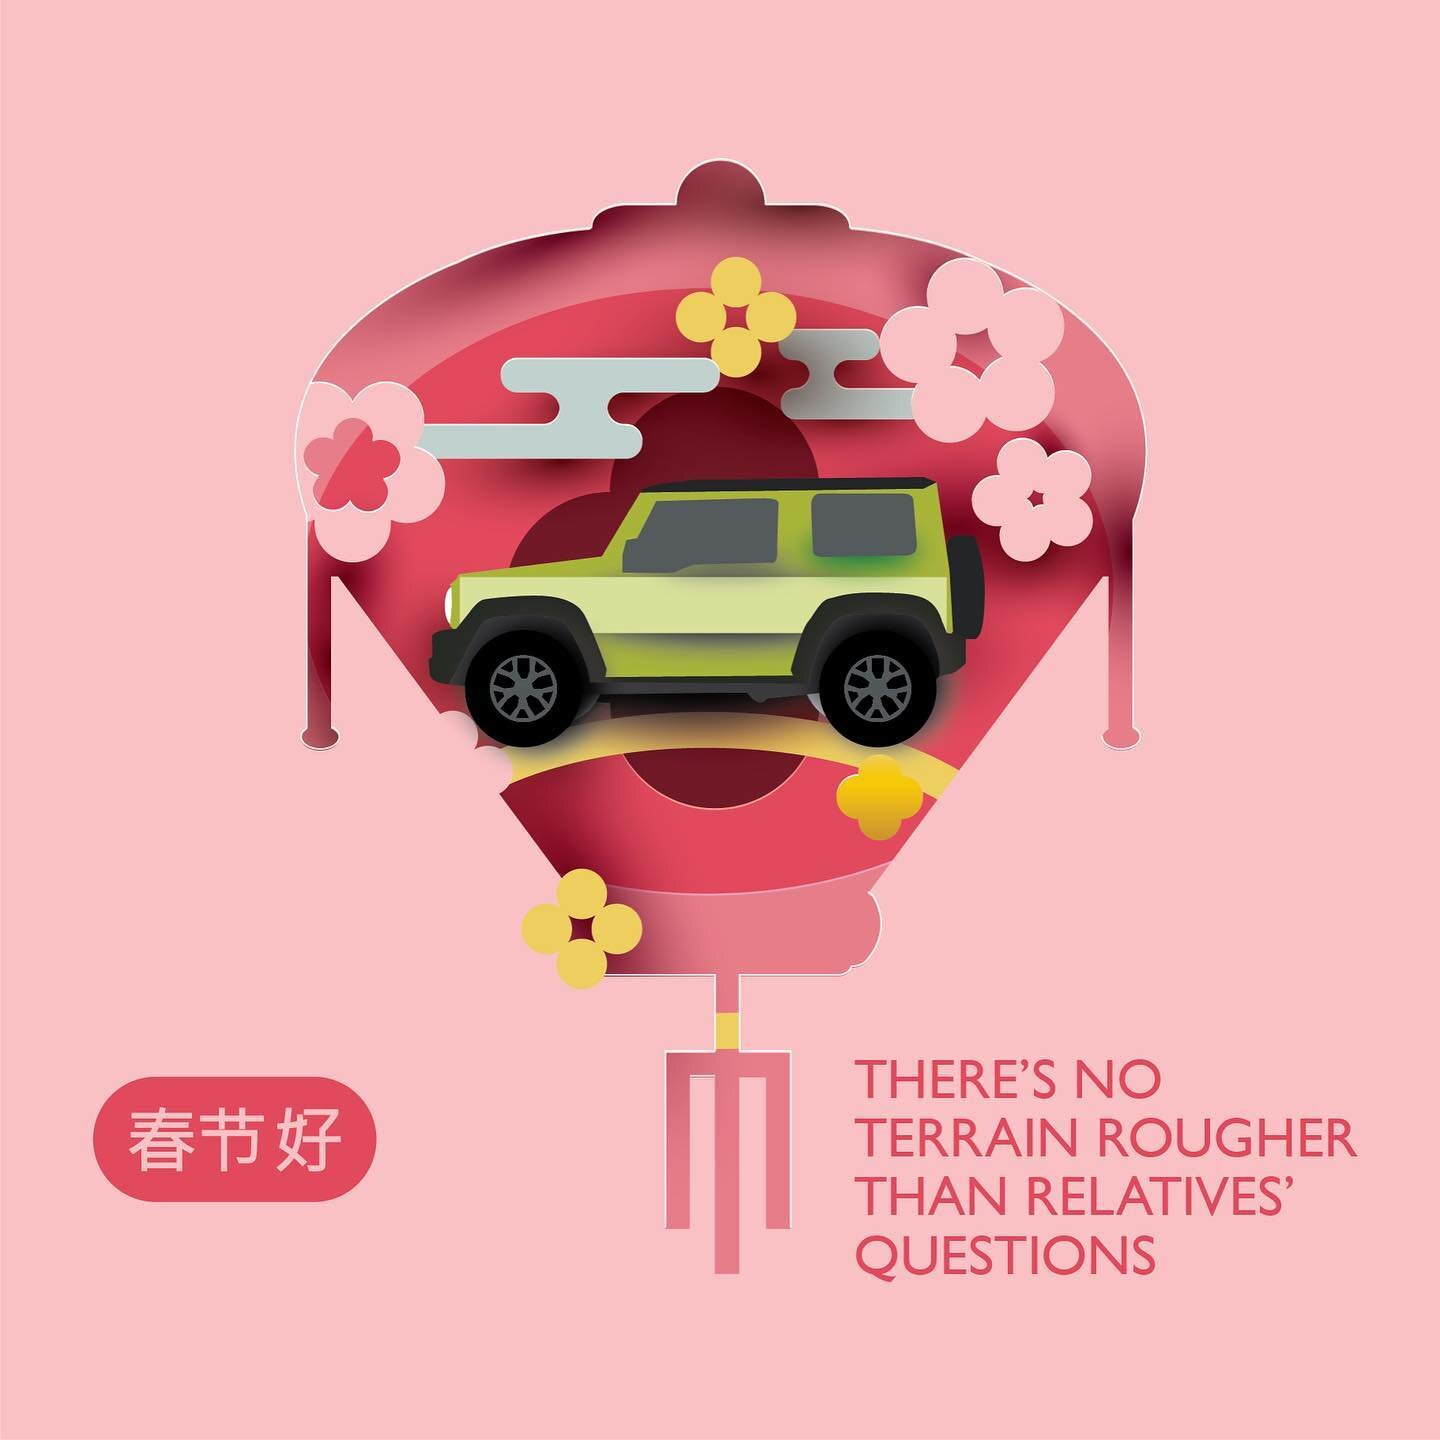 One of 3 social posts we created for Suzuki this CNY. Happy Year of the Rat to all #CNY #Creative #social